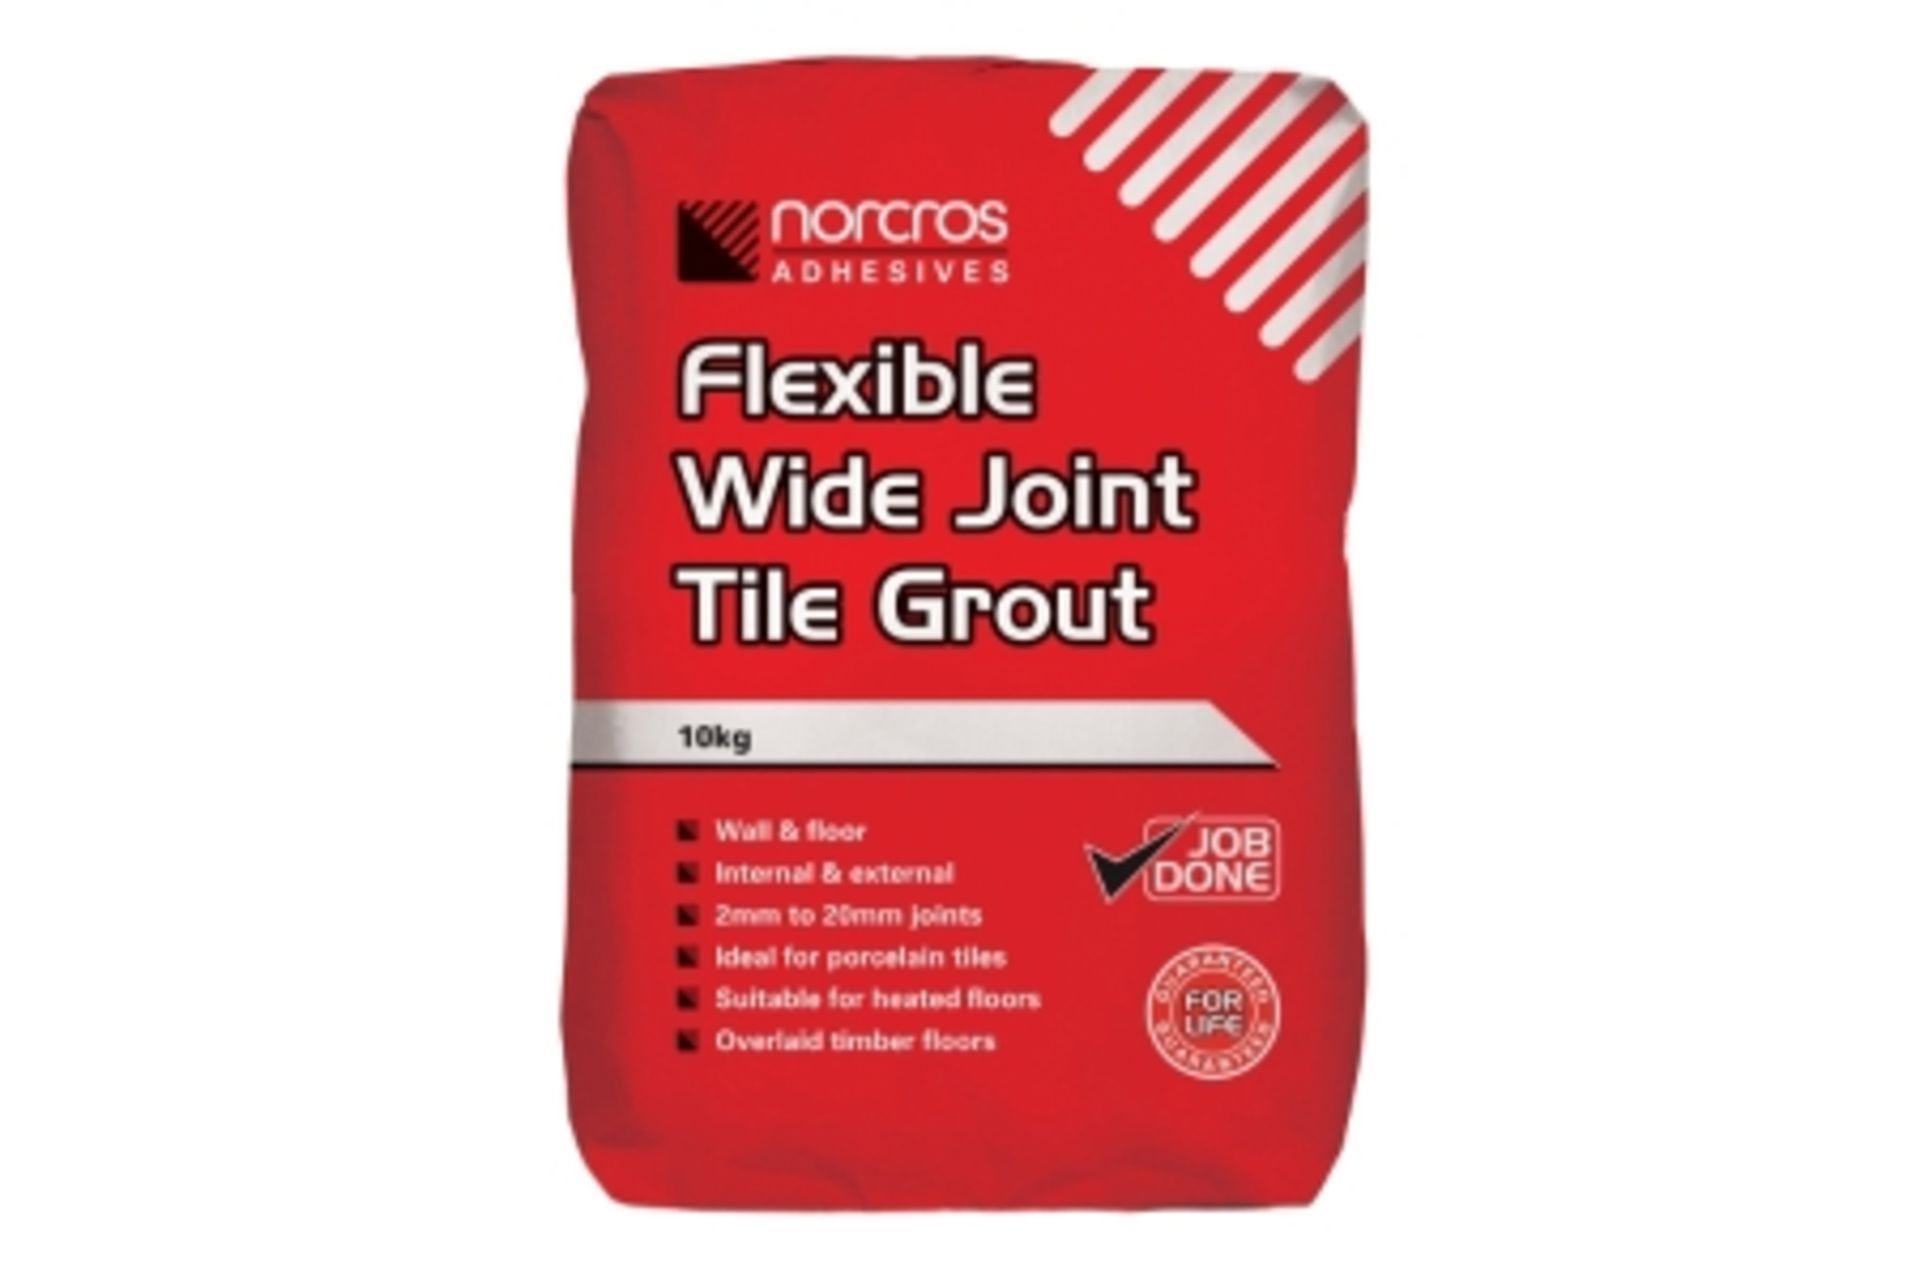 15 X BRAND NEW NORCROS FLEXIBLE WIDE JOINT TILE GROUT 10KG ARCTIC WHITE R7-1